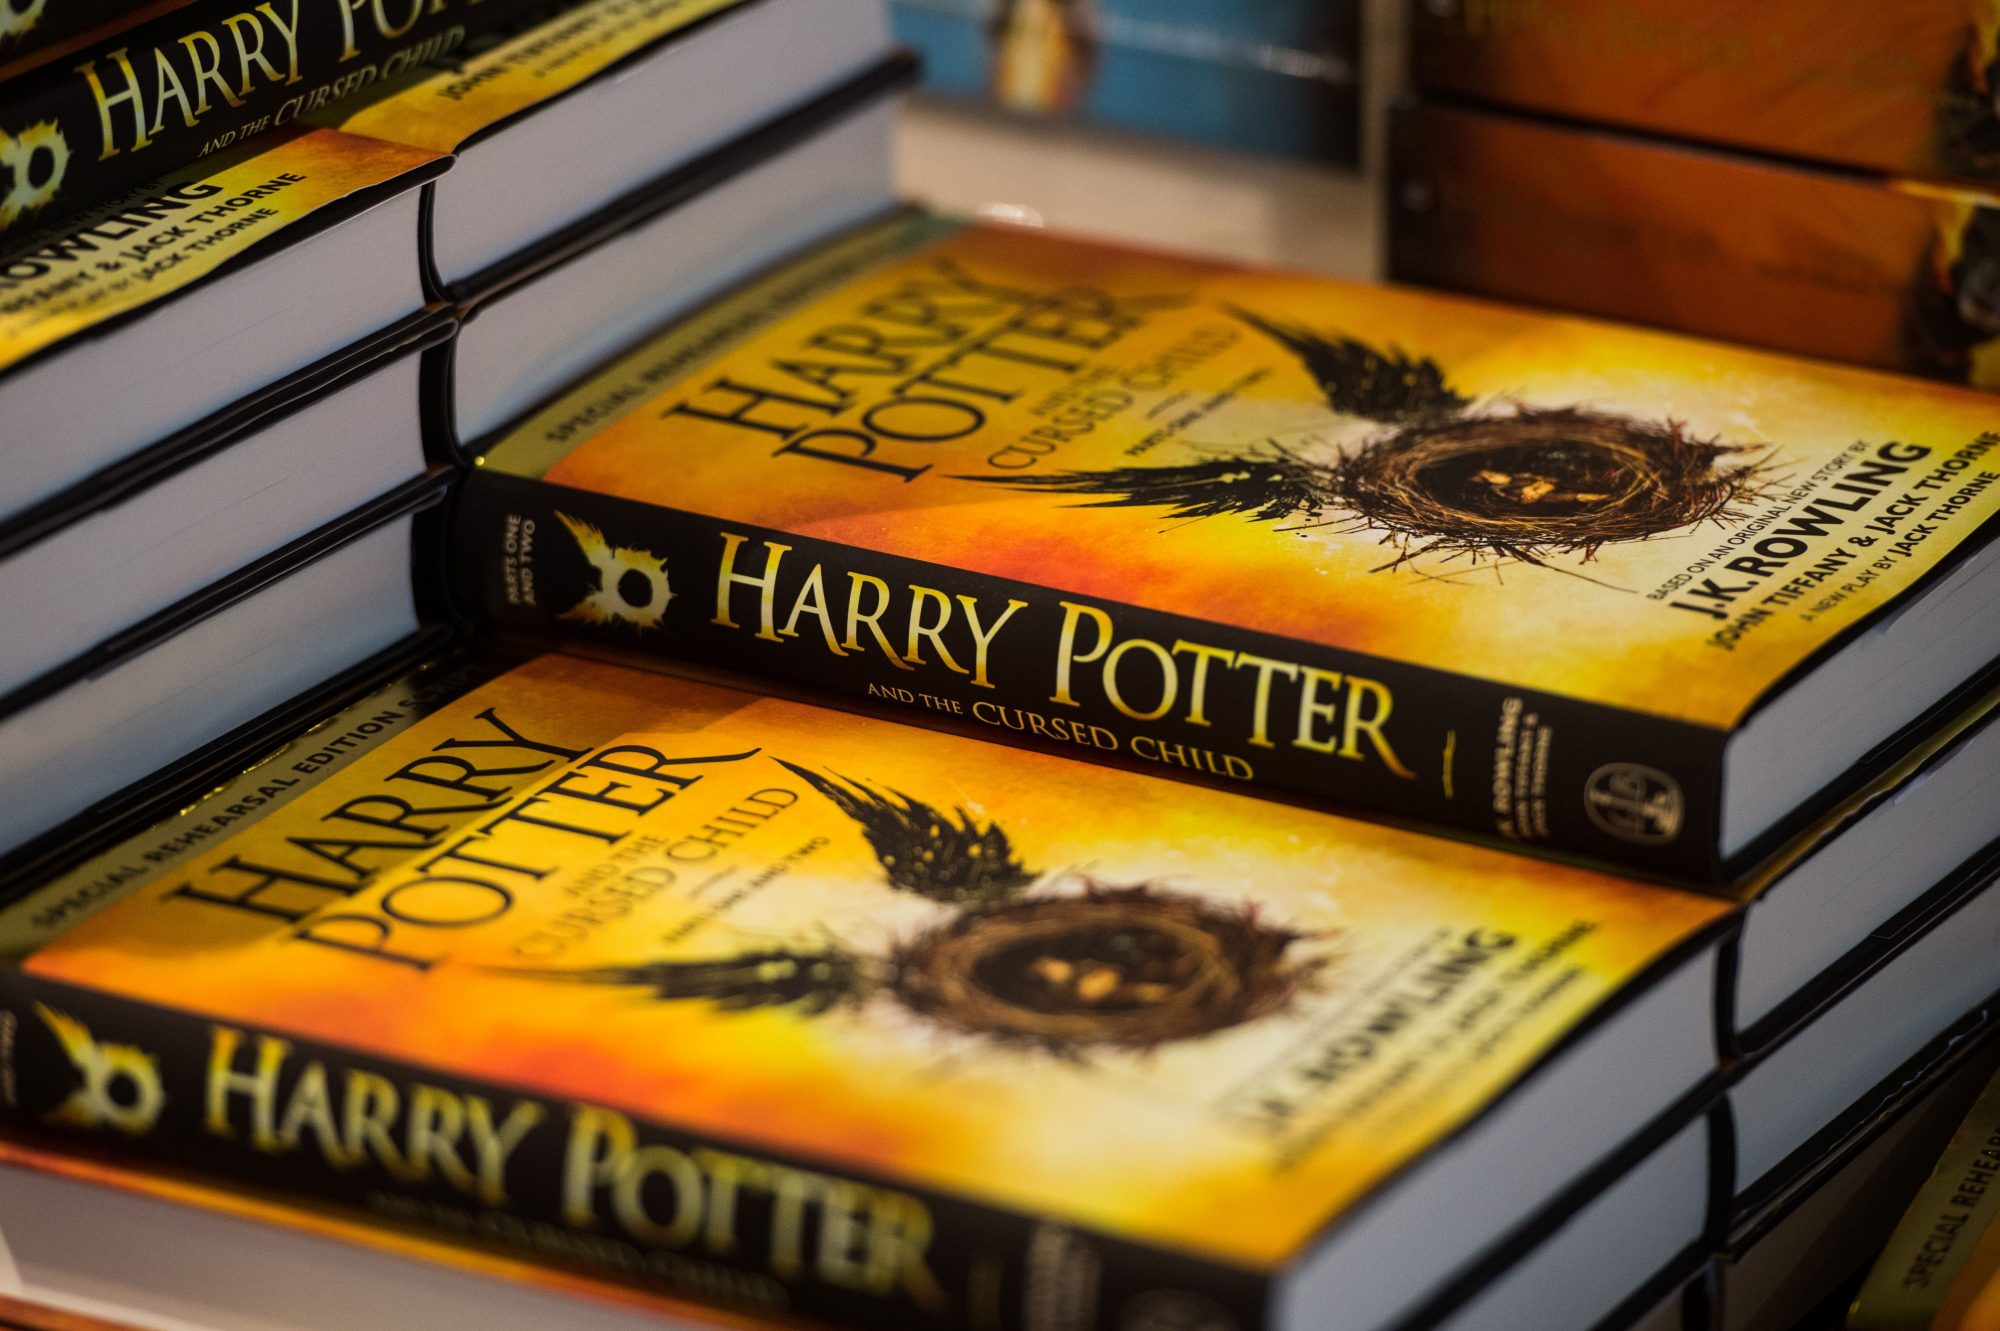 Detail Buku Harry Potter And The Cursed Child Nomer 38